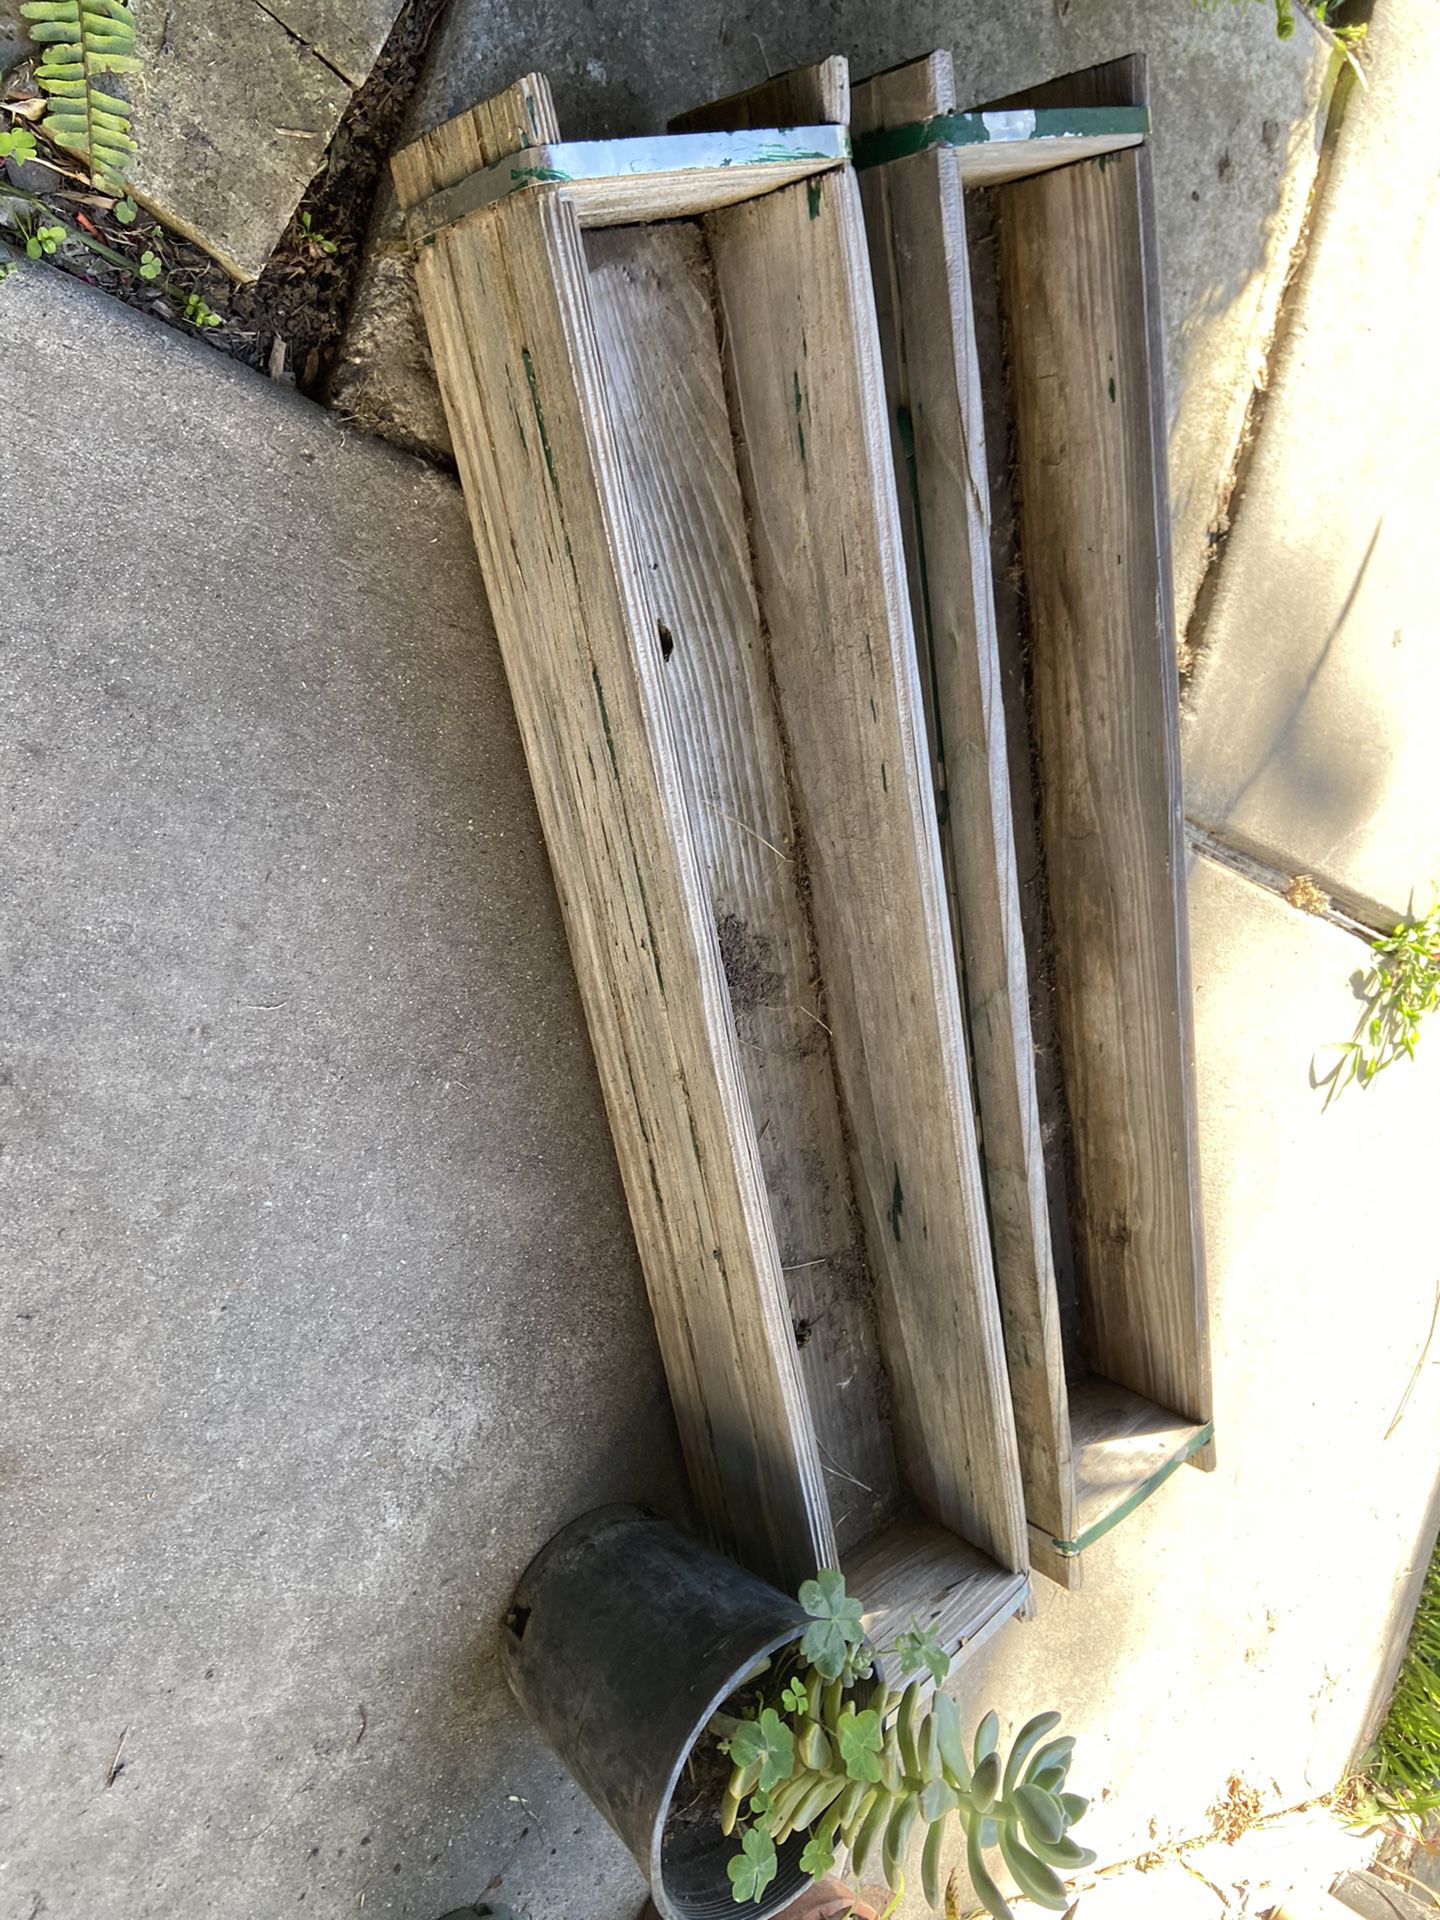 3 foot wooden planter boxes